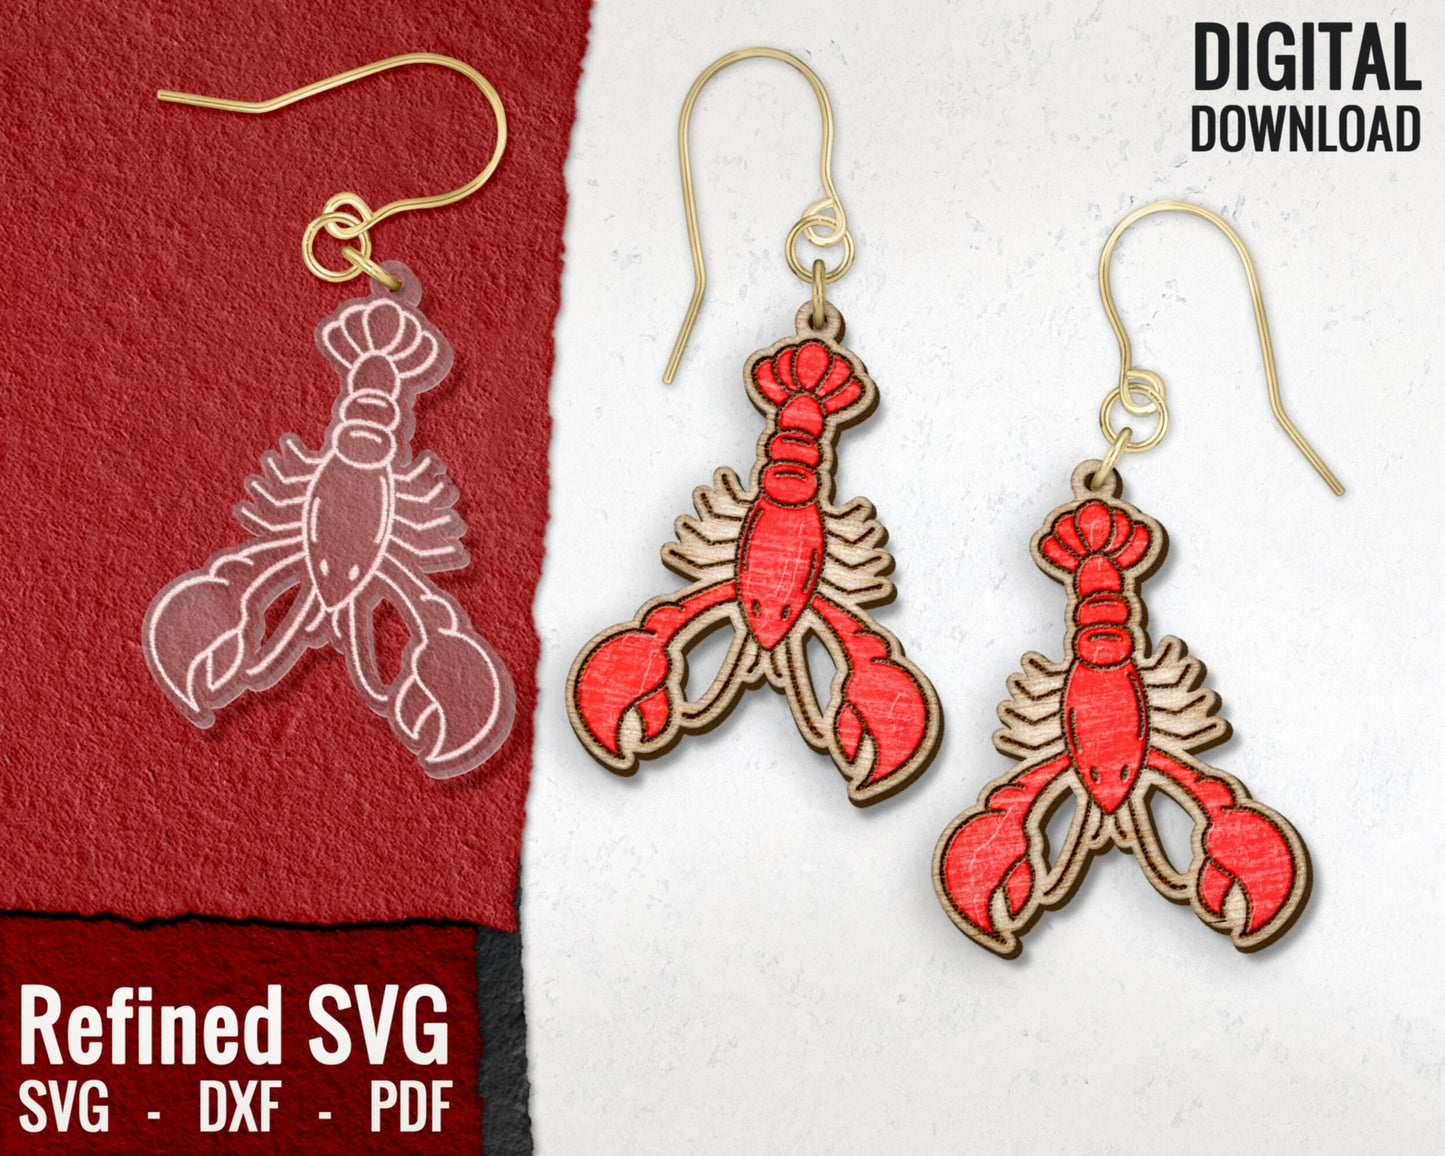 Lobster Hair Clips + Matching Earring SVG File Set, Lobster 2 Hair Clip Files + Earring SVG Files,Lobster Set of Claw Hair Clip Laser Design